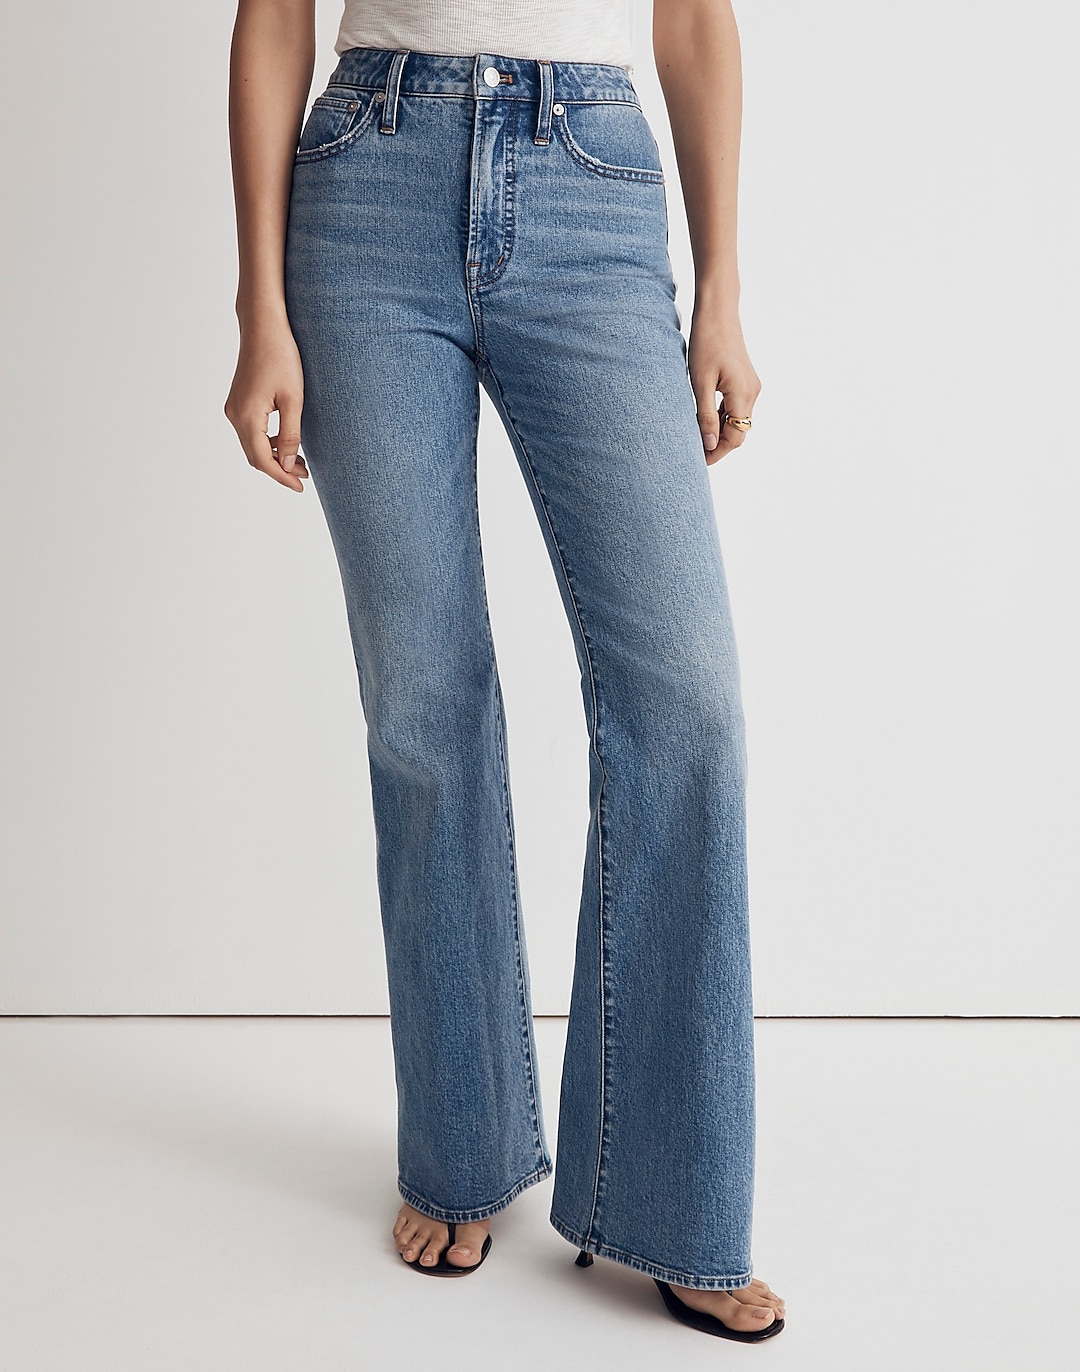 The Perfect Vintage Flare Jean in Tarlow Wash | Madewell